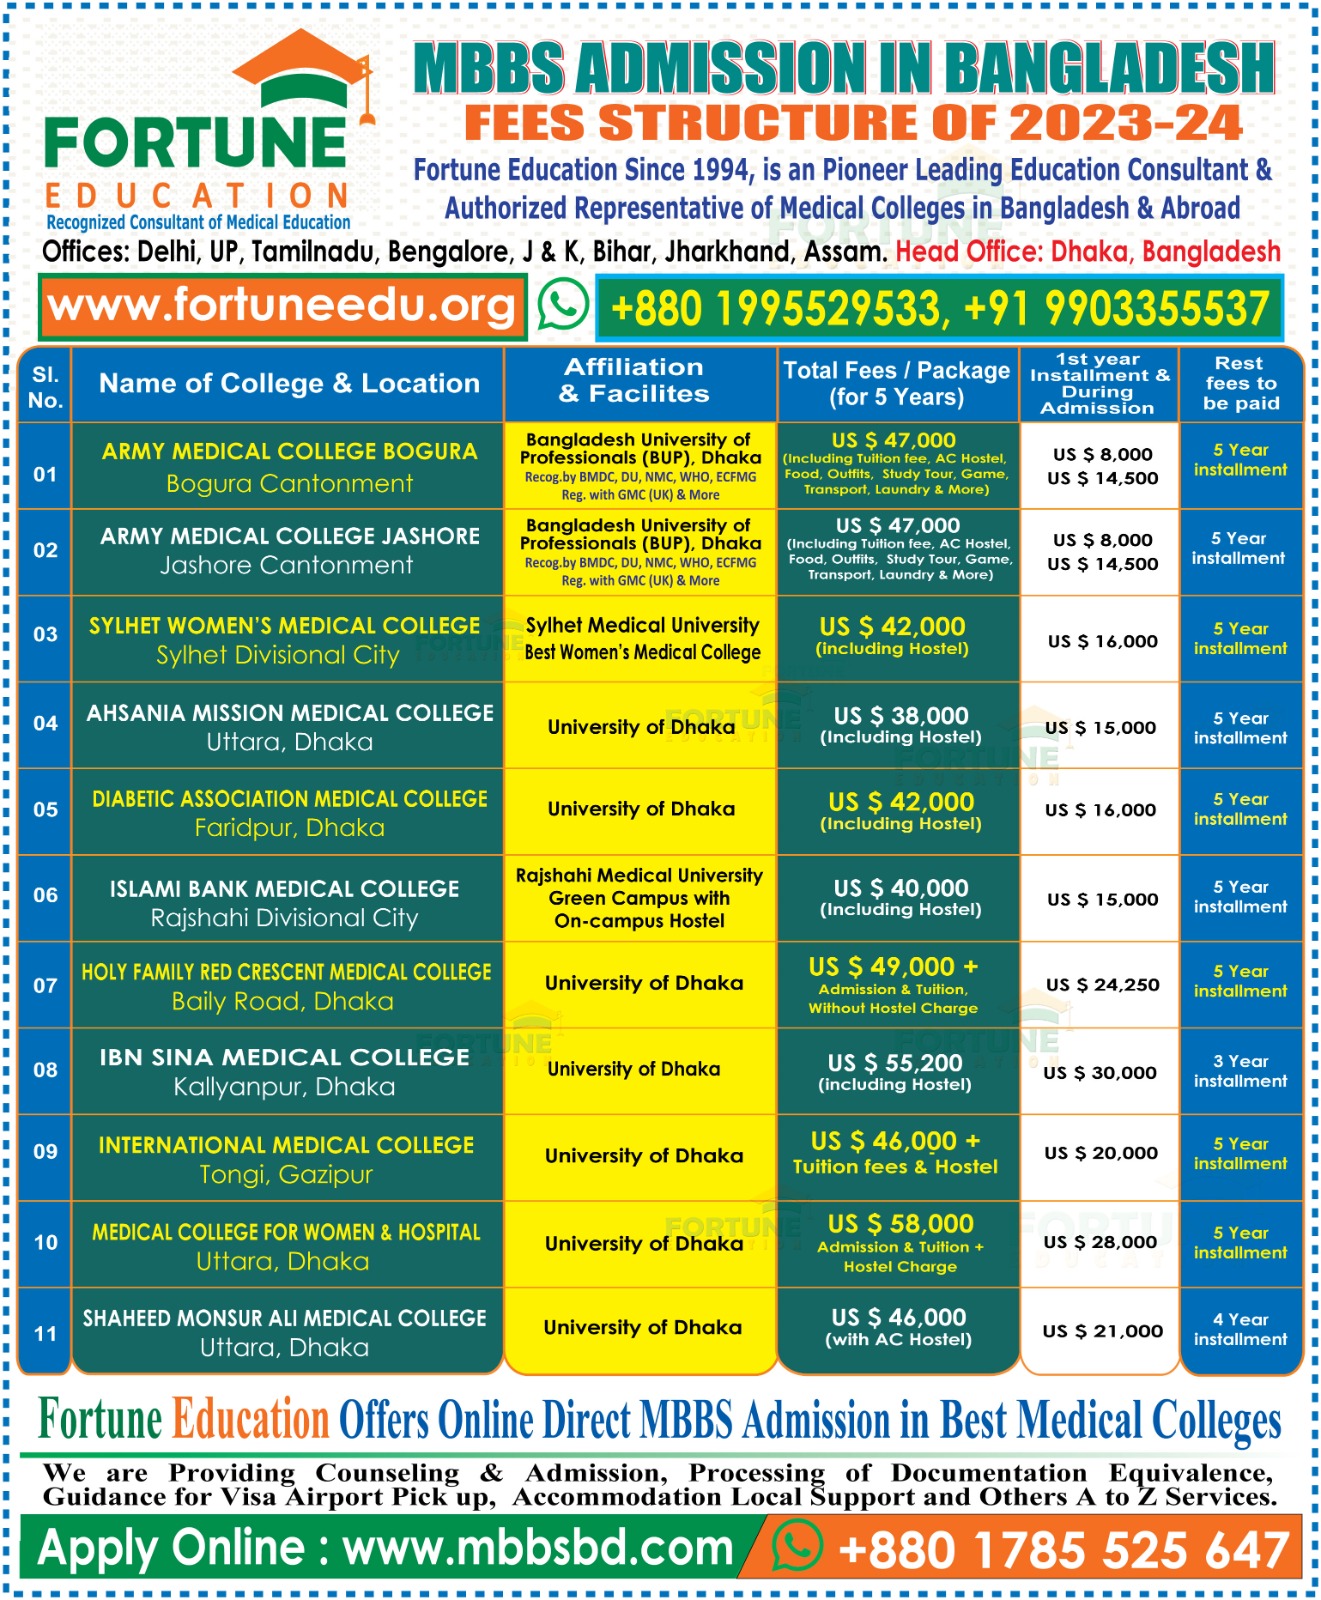 MBBS Fees Structure 2023-24